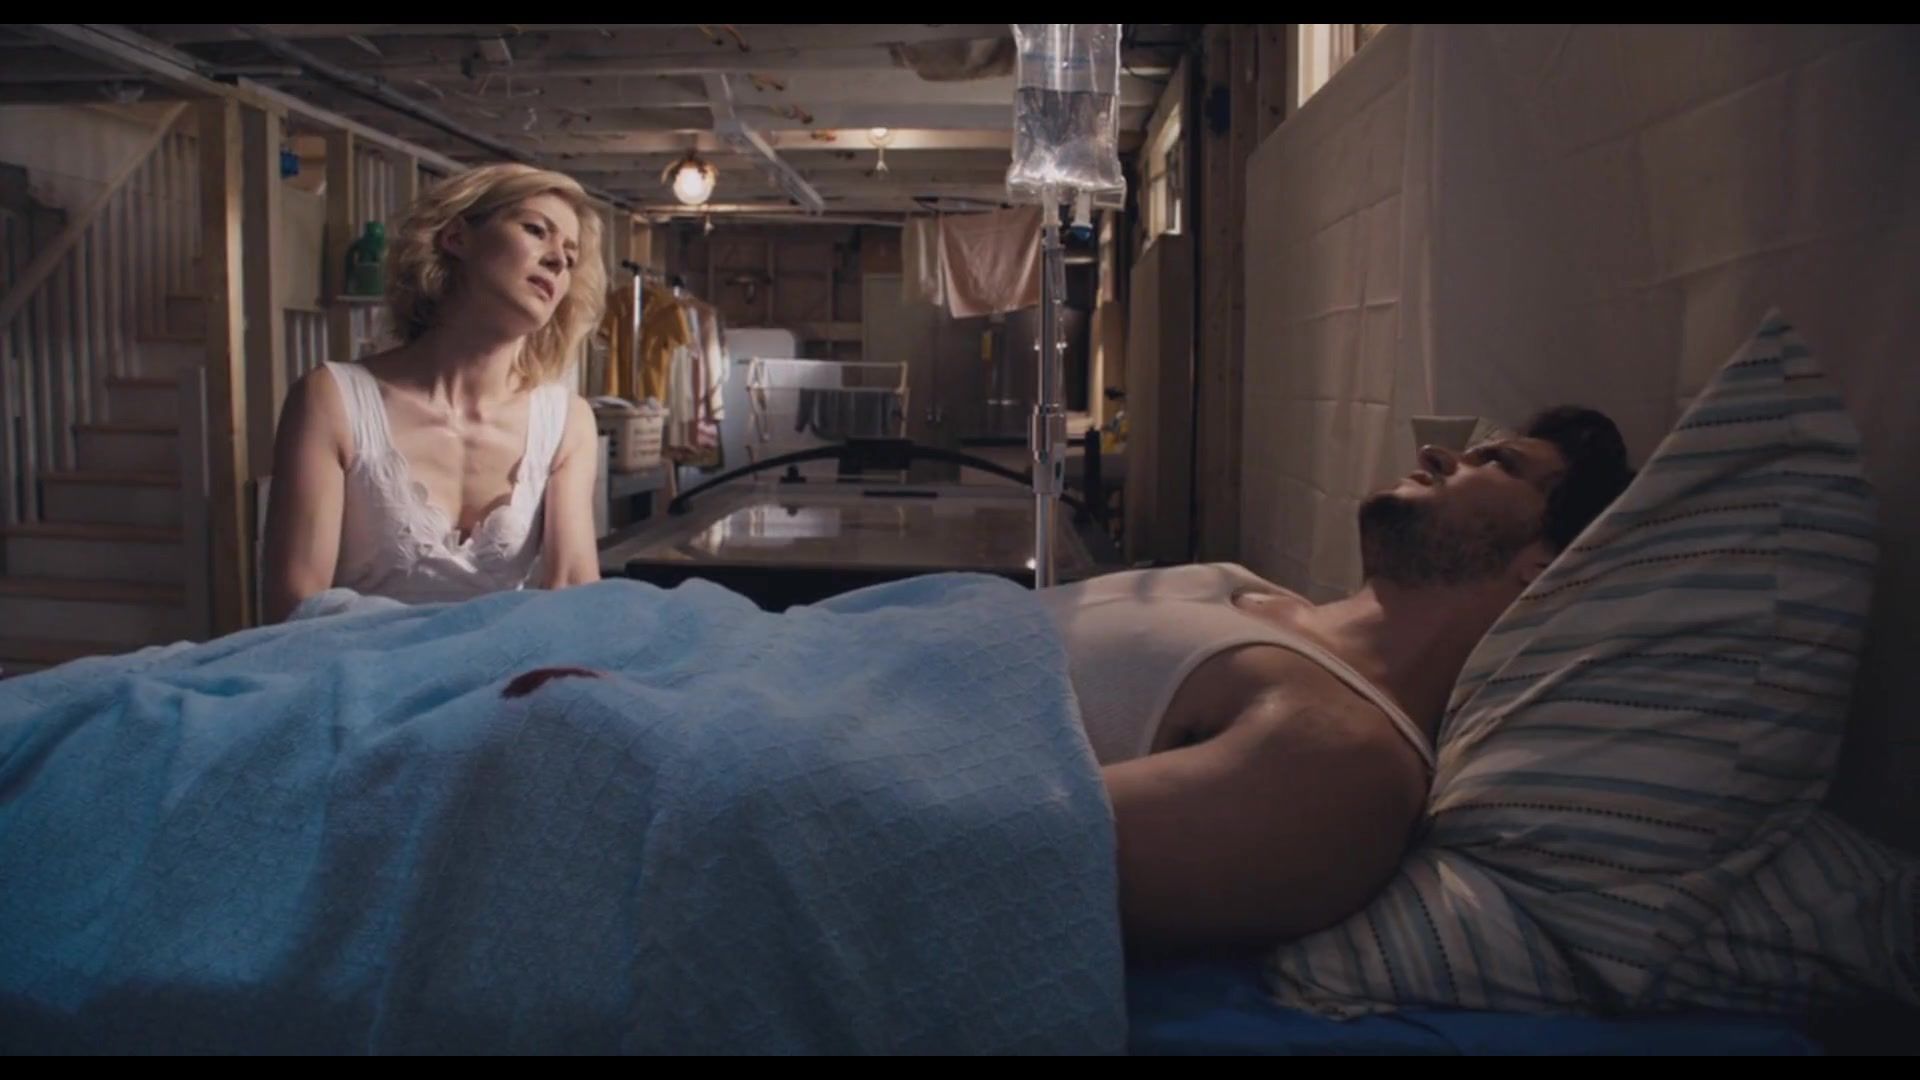 Amateur Cum Watch sexy Rosamund Pike gives Ruined Orgasm Handjob to Wounded Man Footjob slave